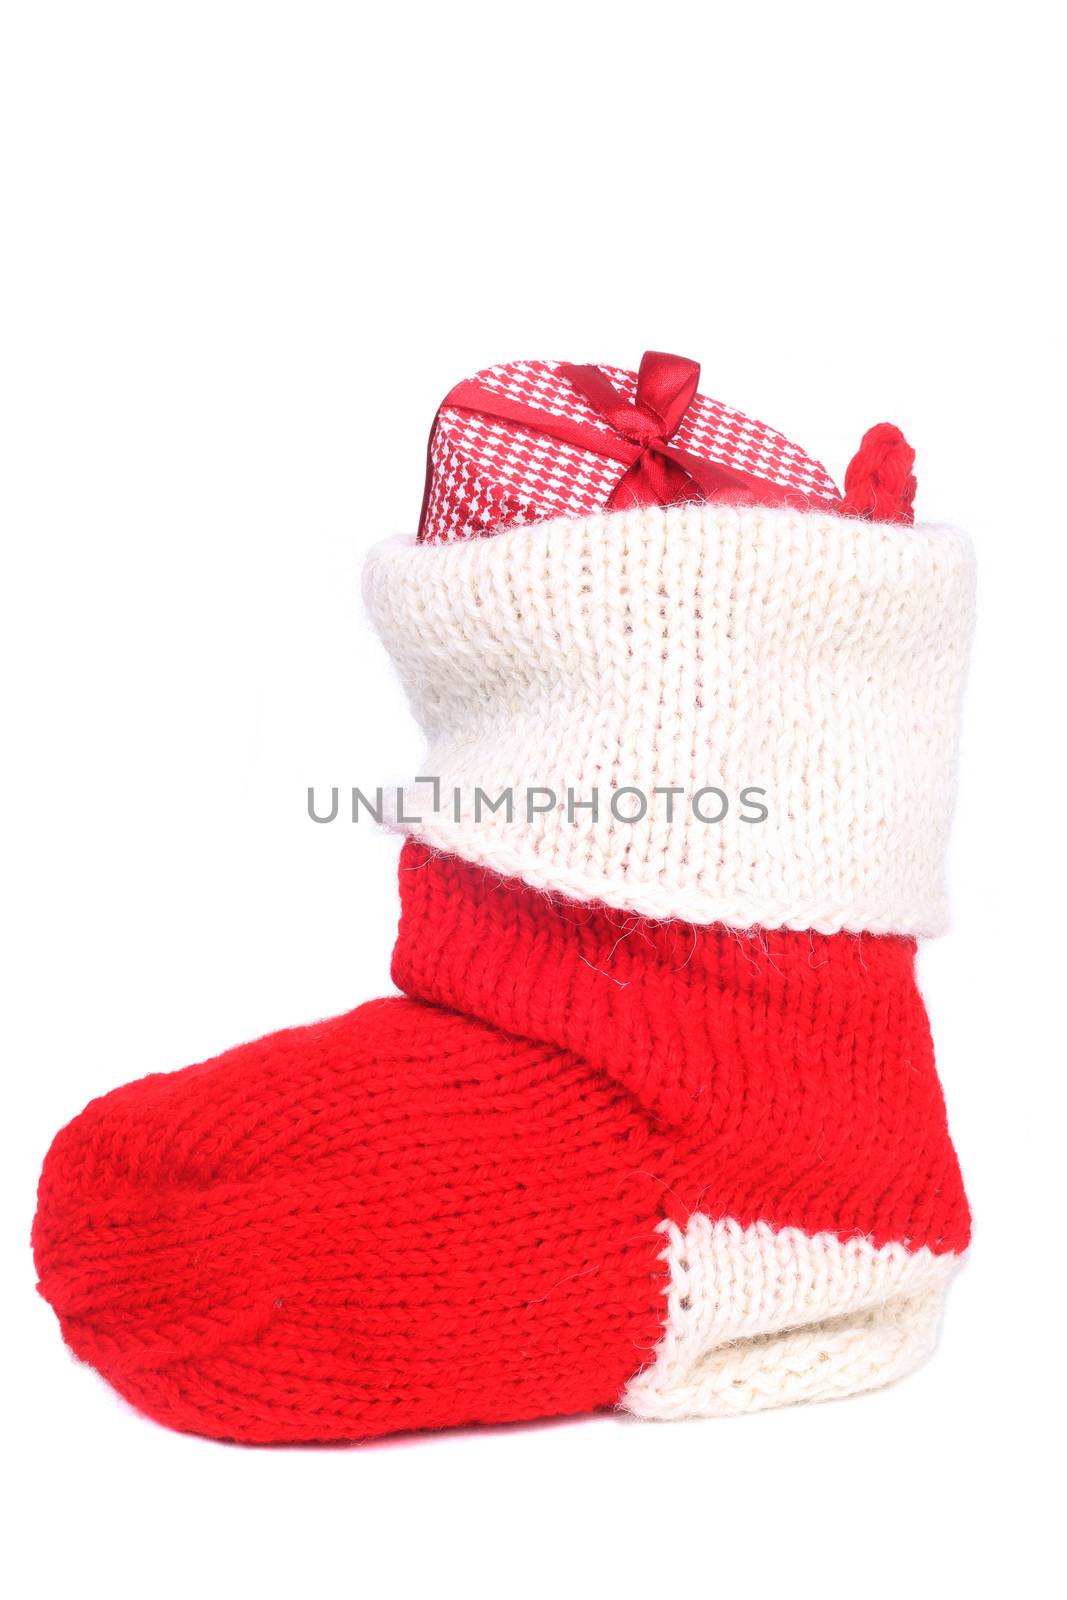 Stuffed Christmas stocking red and white woolen sock with gifts inside isolated on white background